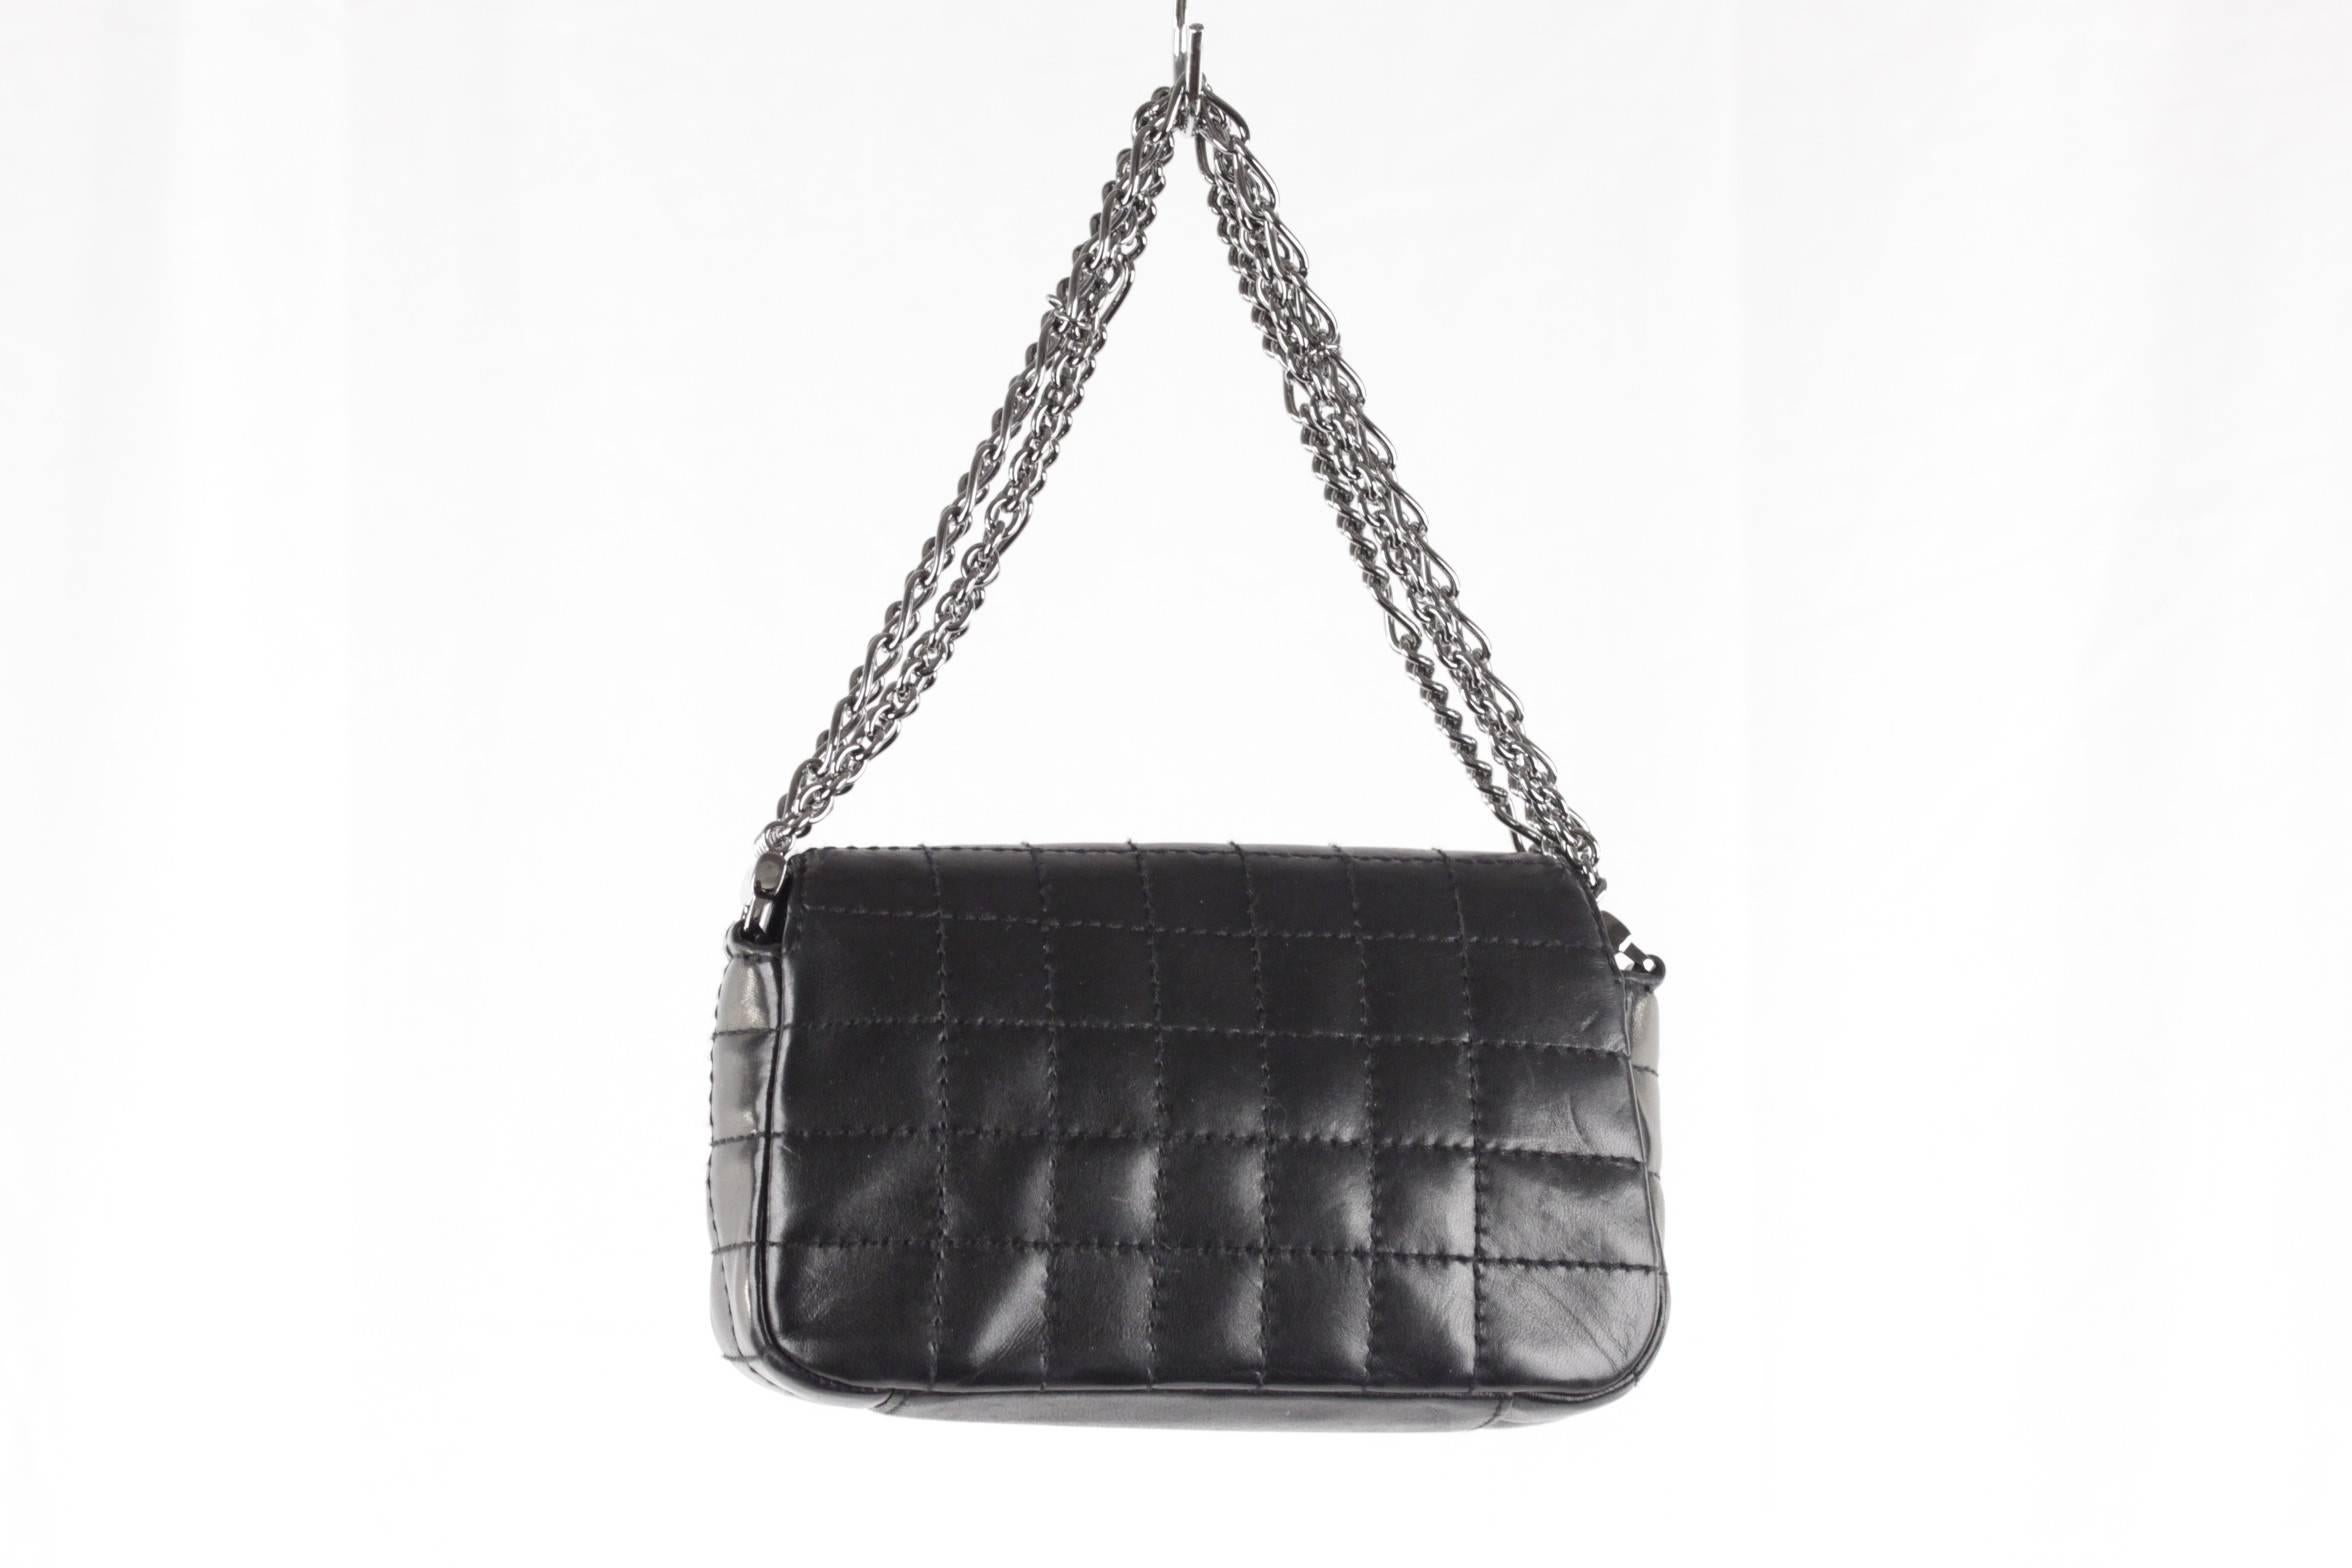 Chanel Black Square Quilted Leather Mini Flap Handbag Multi Chain Bag In Excellent Condition In Rome, Rome